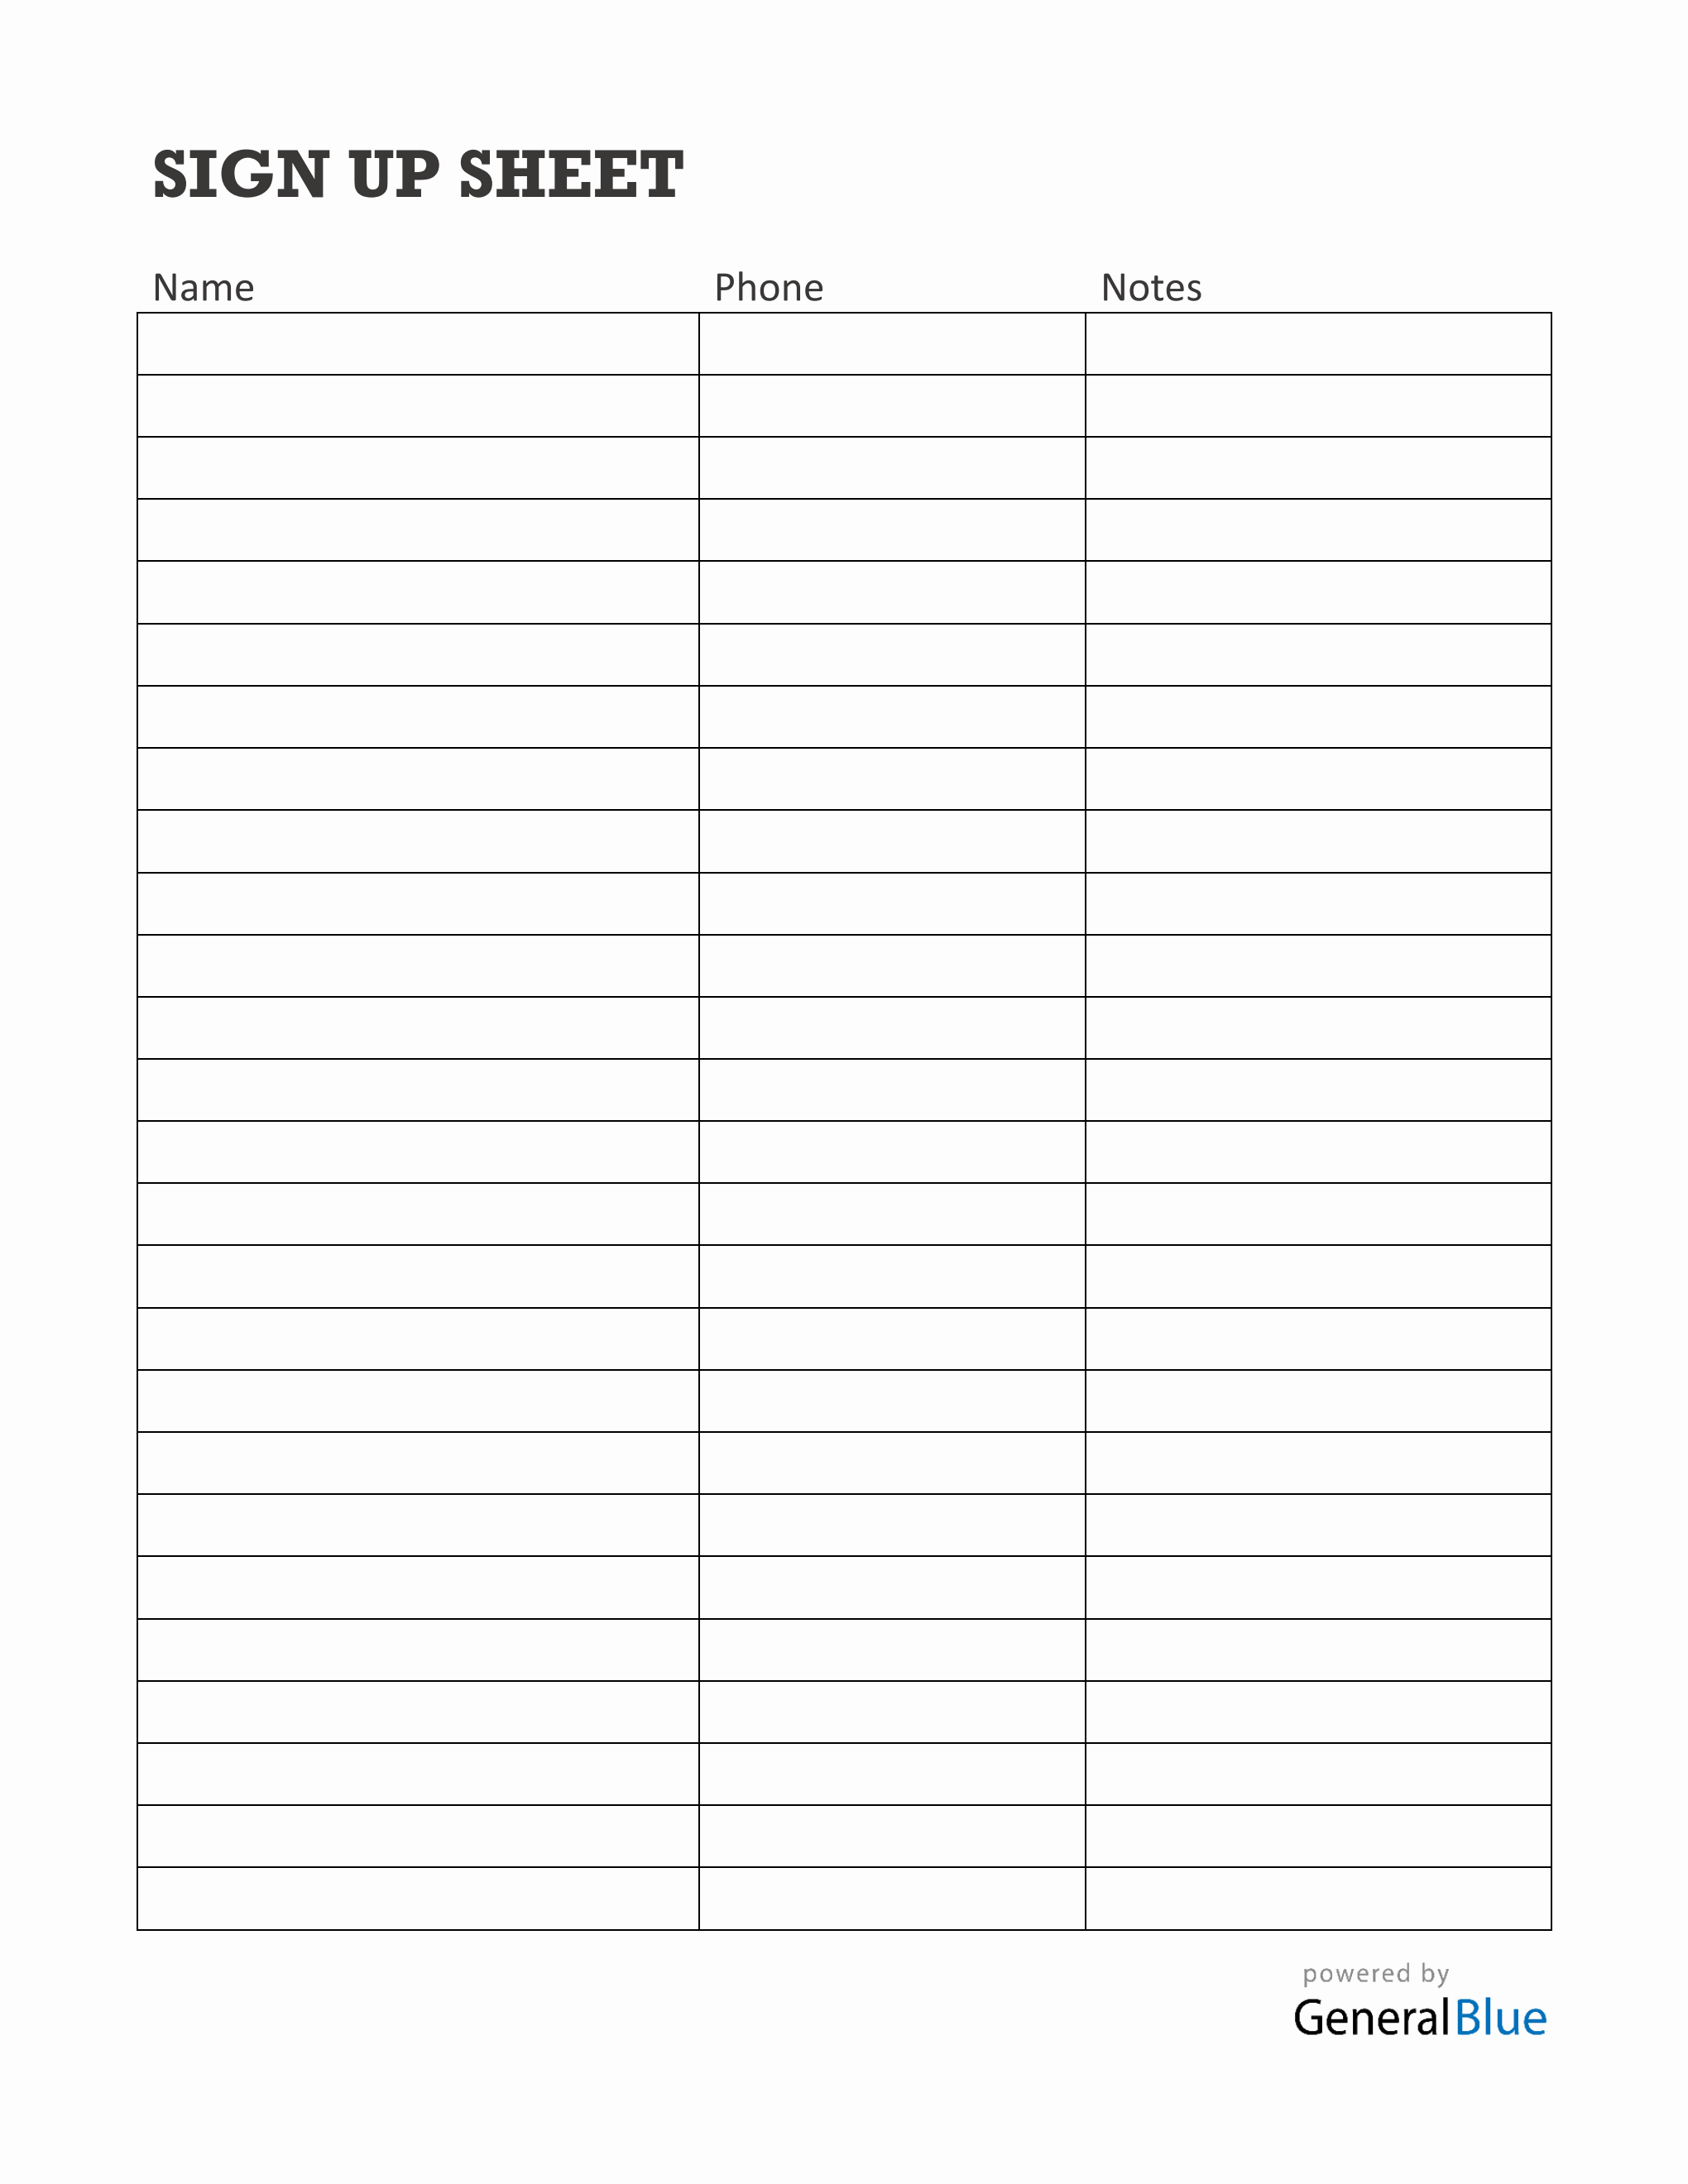 blank-sign-up-sheet-in-word